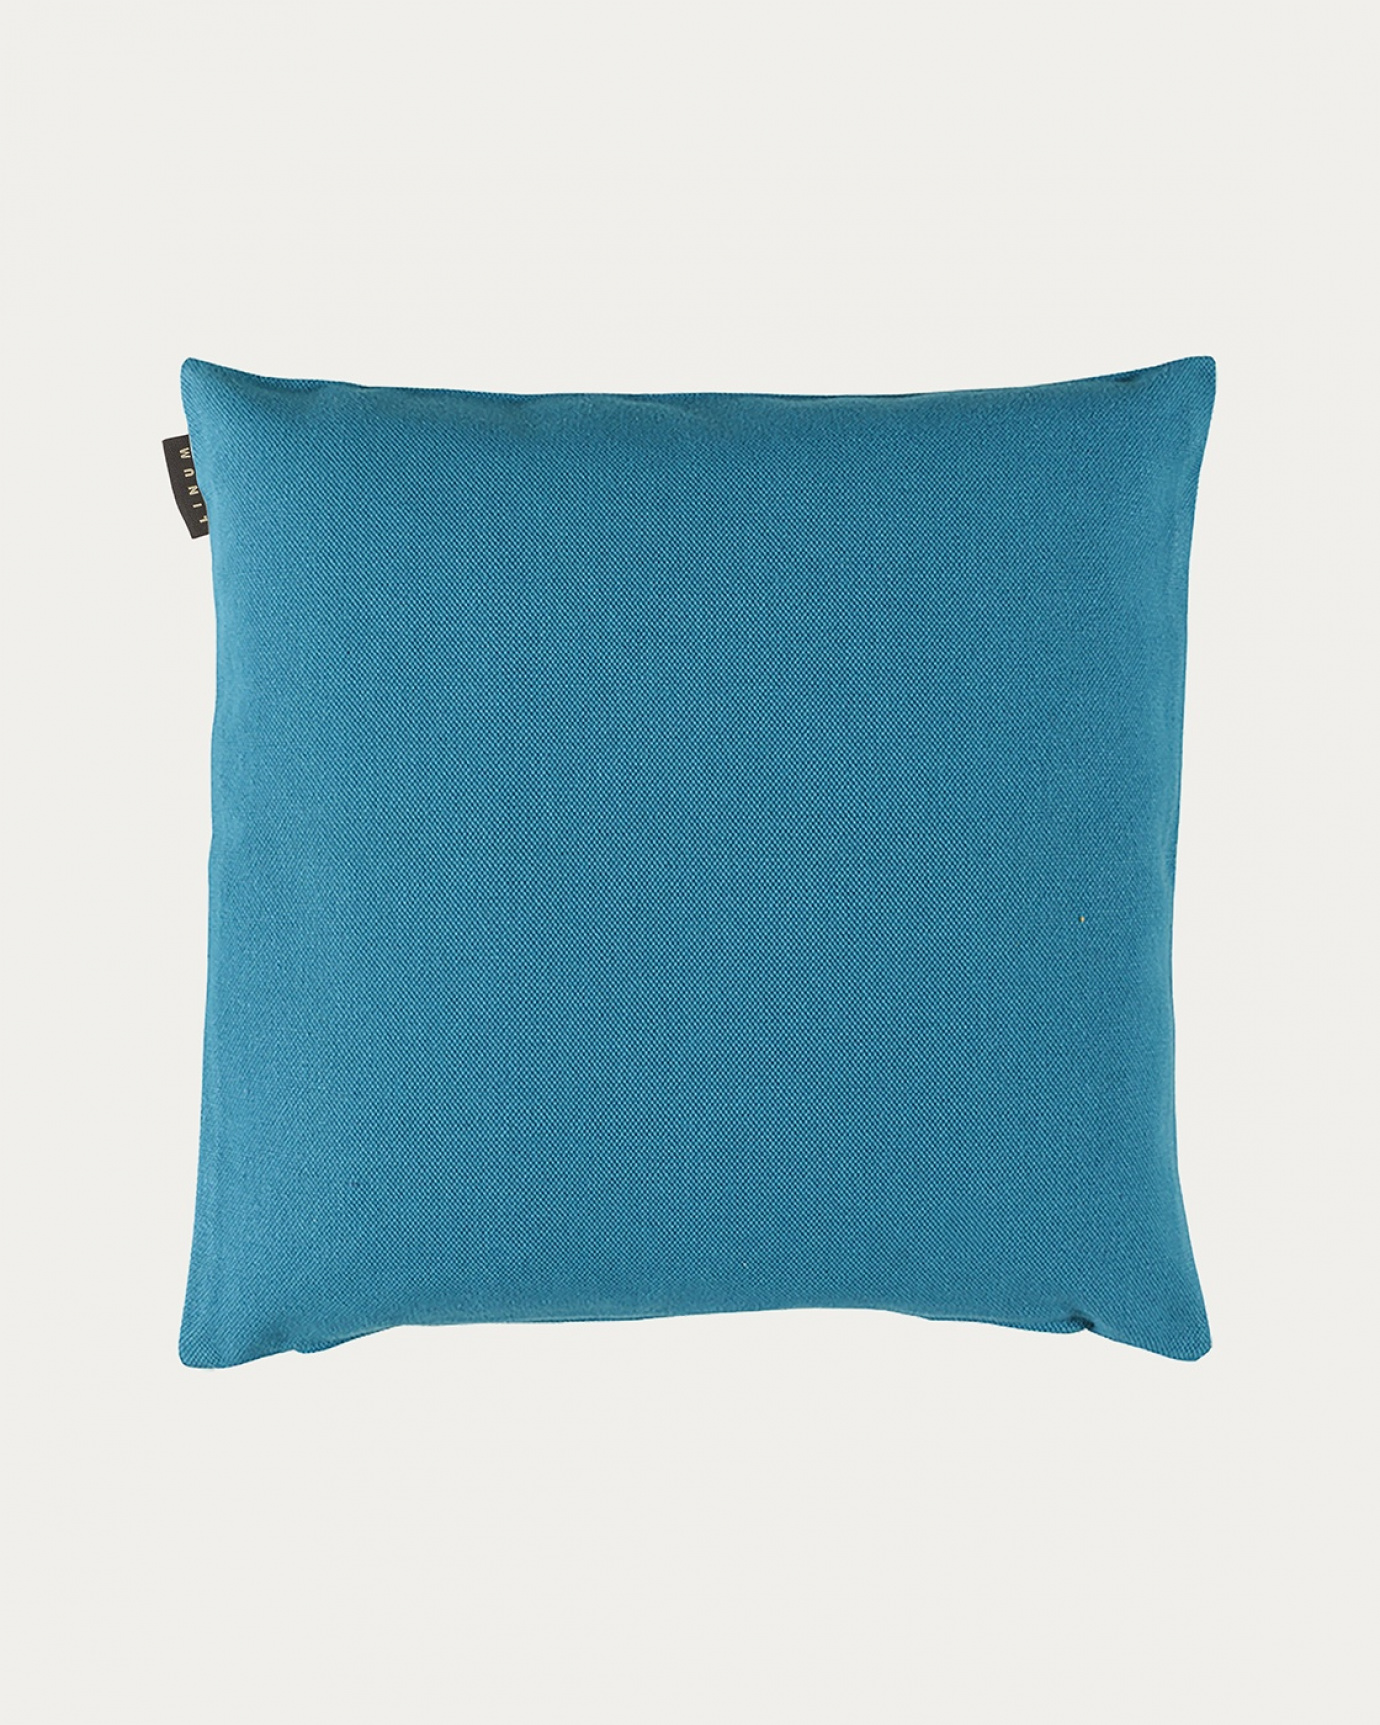 Product image aqua turquoise PEPPER cushion cover made of soft cotton from LINUM DESIGN. Easy to wash and durable for generations. Size 50x50 cm.